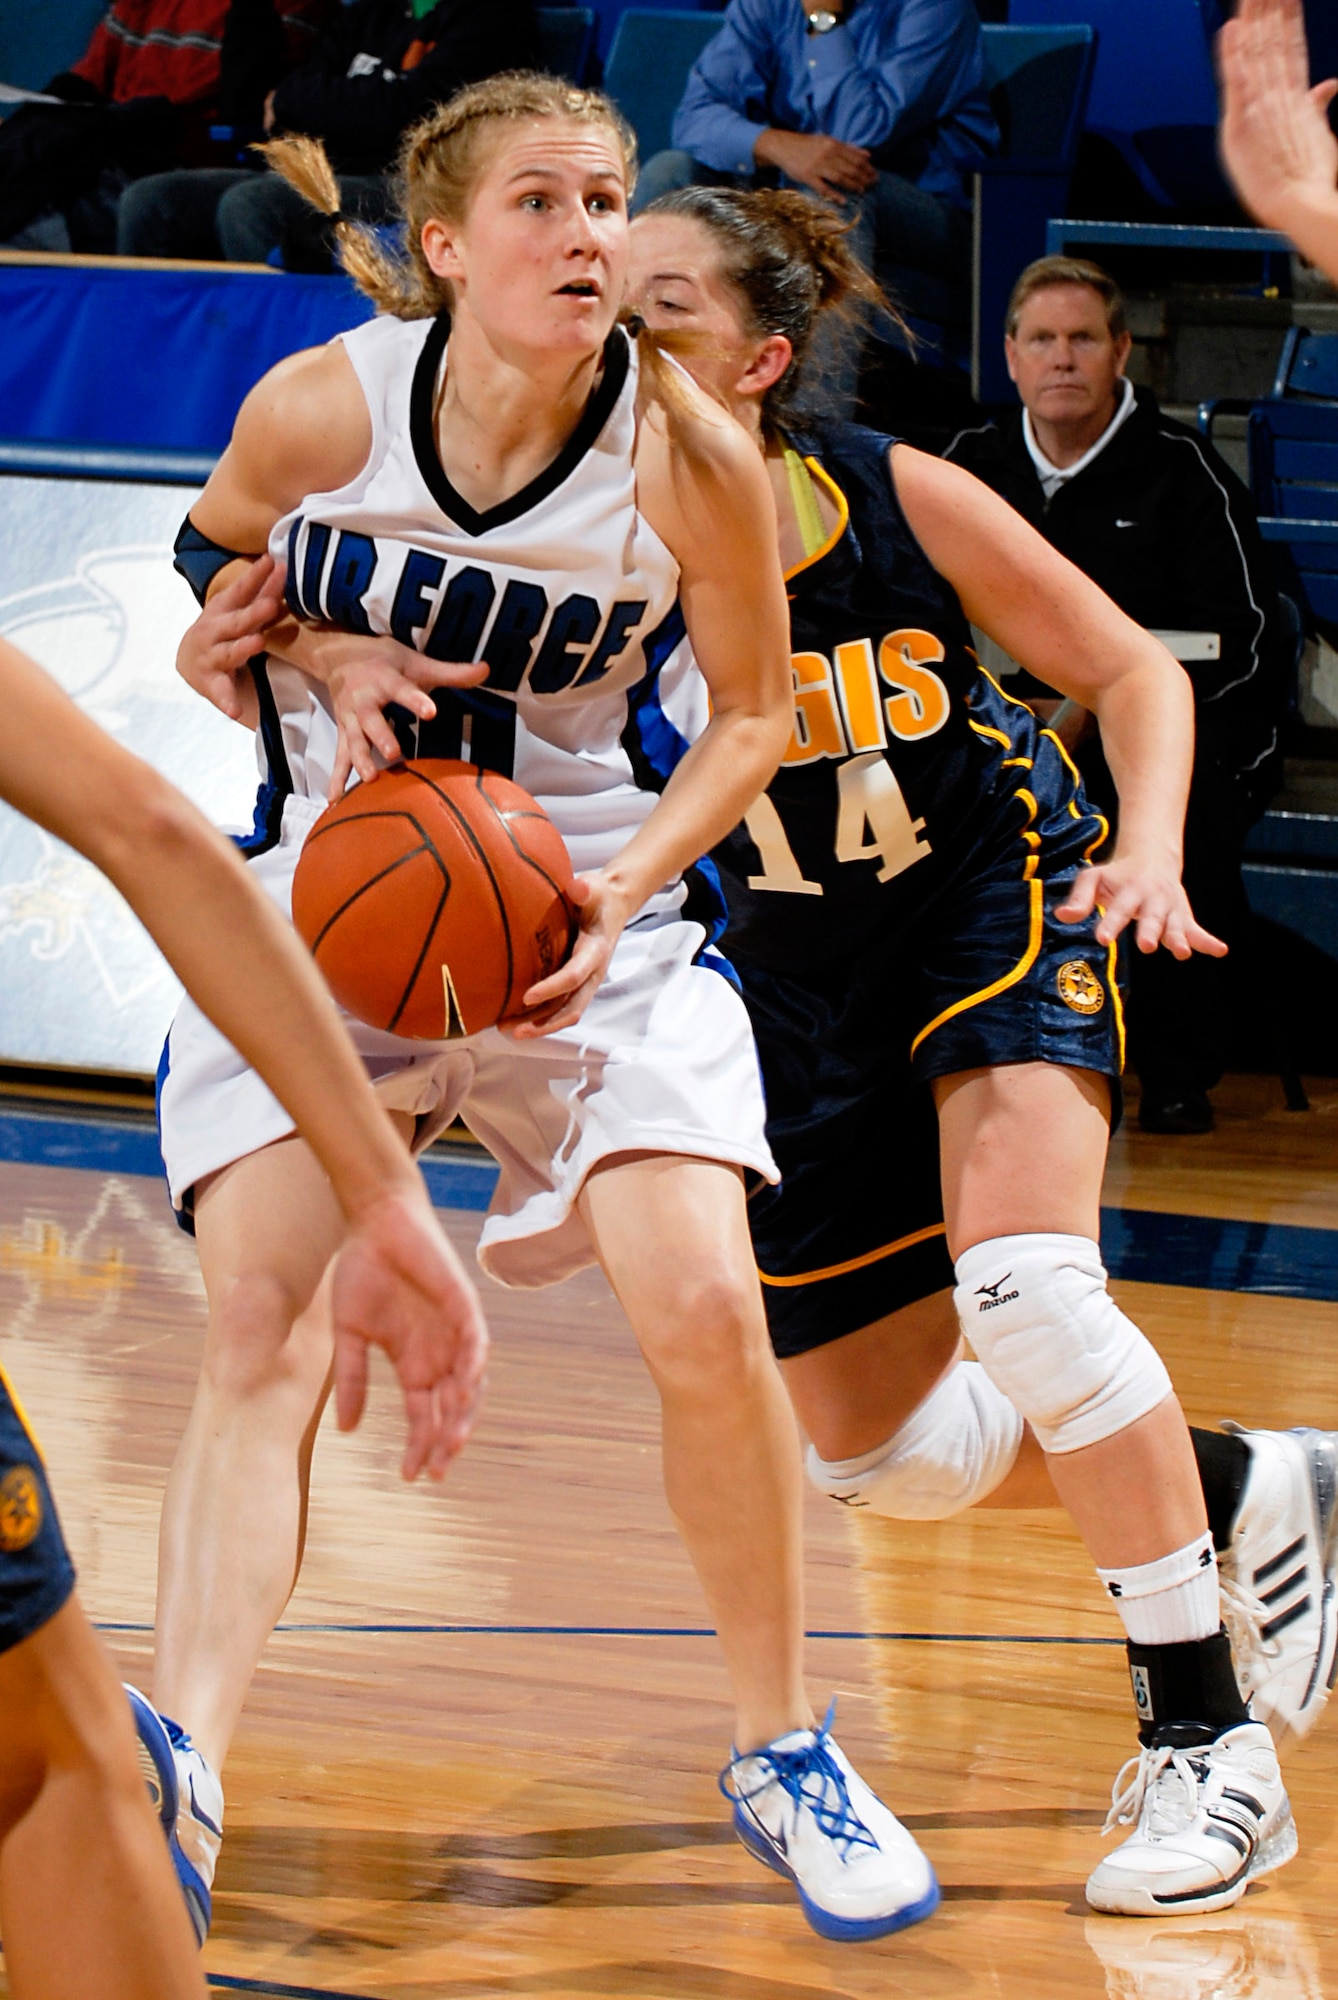 Air Force Academy senior guard Pamela Findlay looks to pass while being defended from behind by Regis University's Stevi Seitz during the Falcons' 89-52 exhibition win Nov. 3 at the Academy's Clune Arena.  Findlay scored 14 points, including 6-of-11 from the floor. The Glenview, Ill., native also grabbed four rebounds and dished out two assists. Air Force opens its regular season Nov. 9 at Oklahoma State.  (U.S. Air Force photo/Lewis Carlyle)